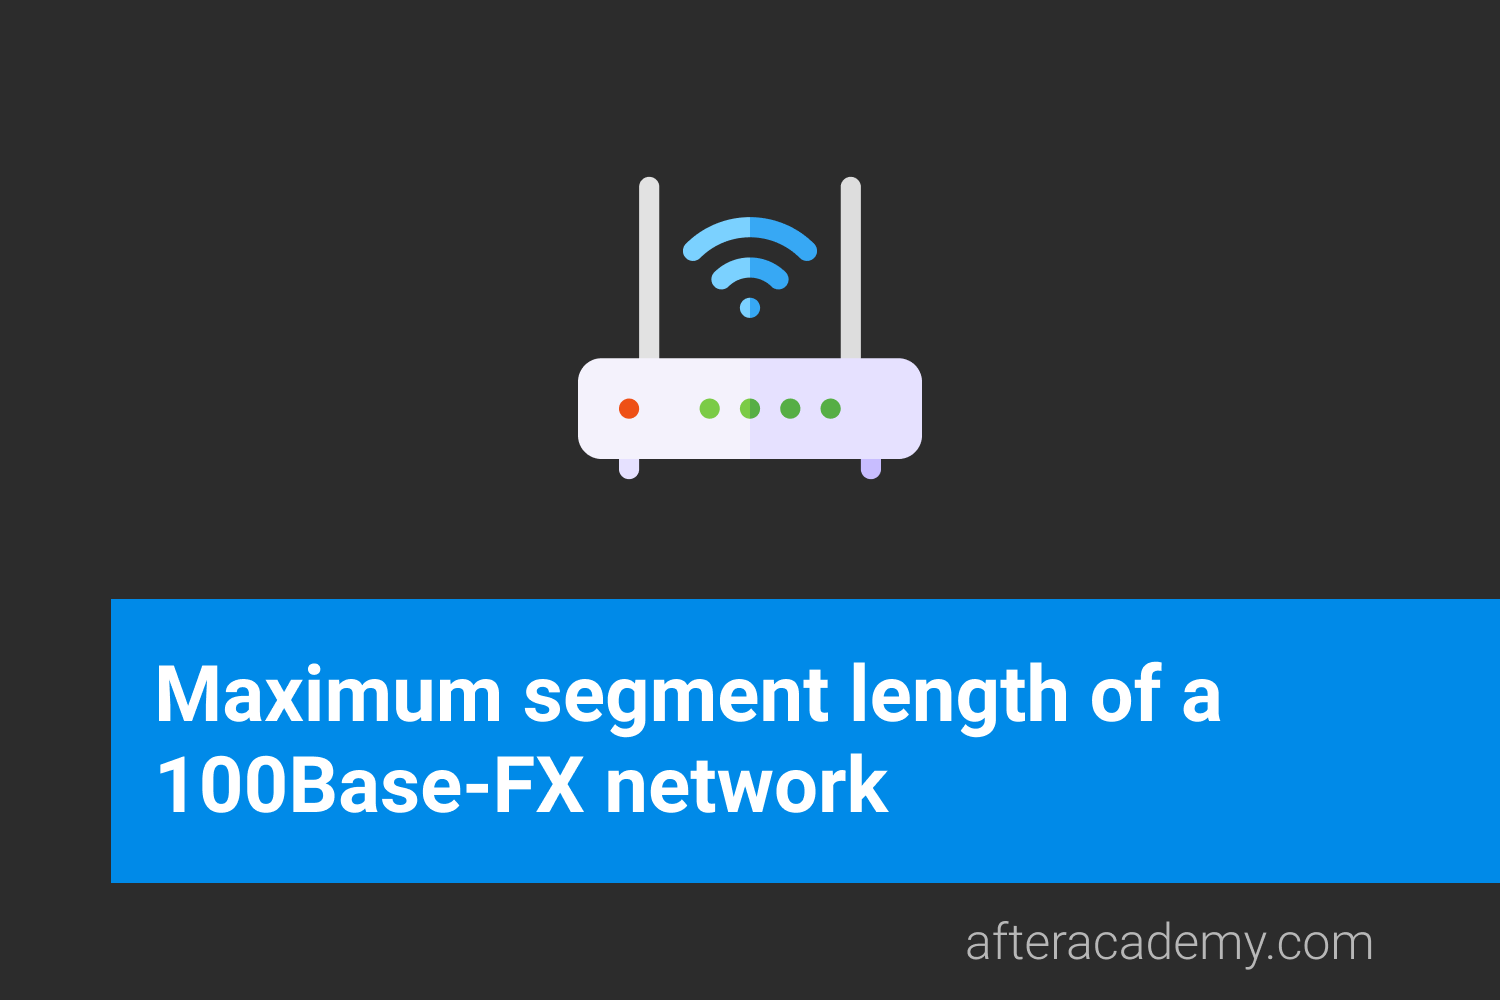 What is the maximum segment length of a 100Base-FX network?